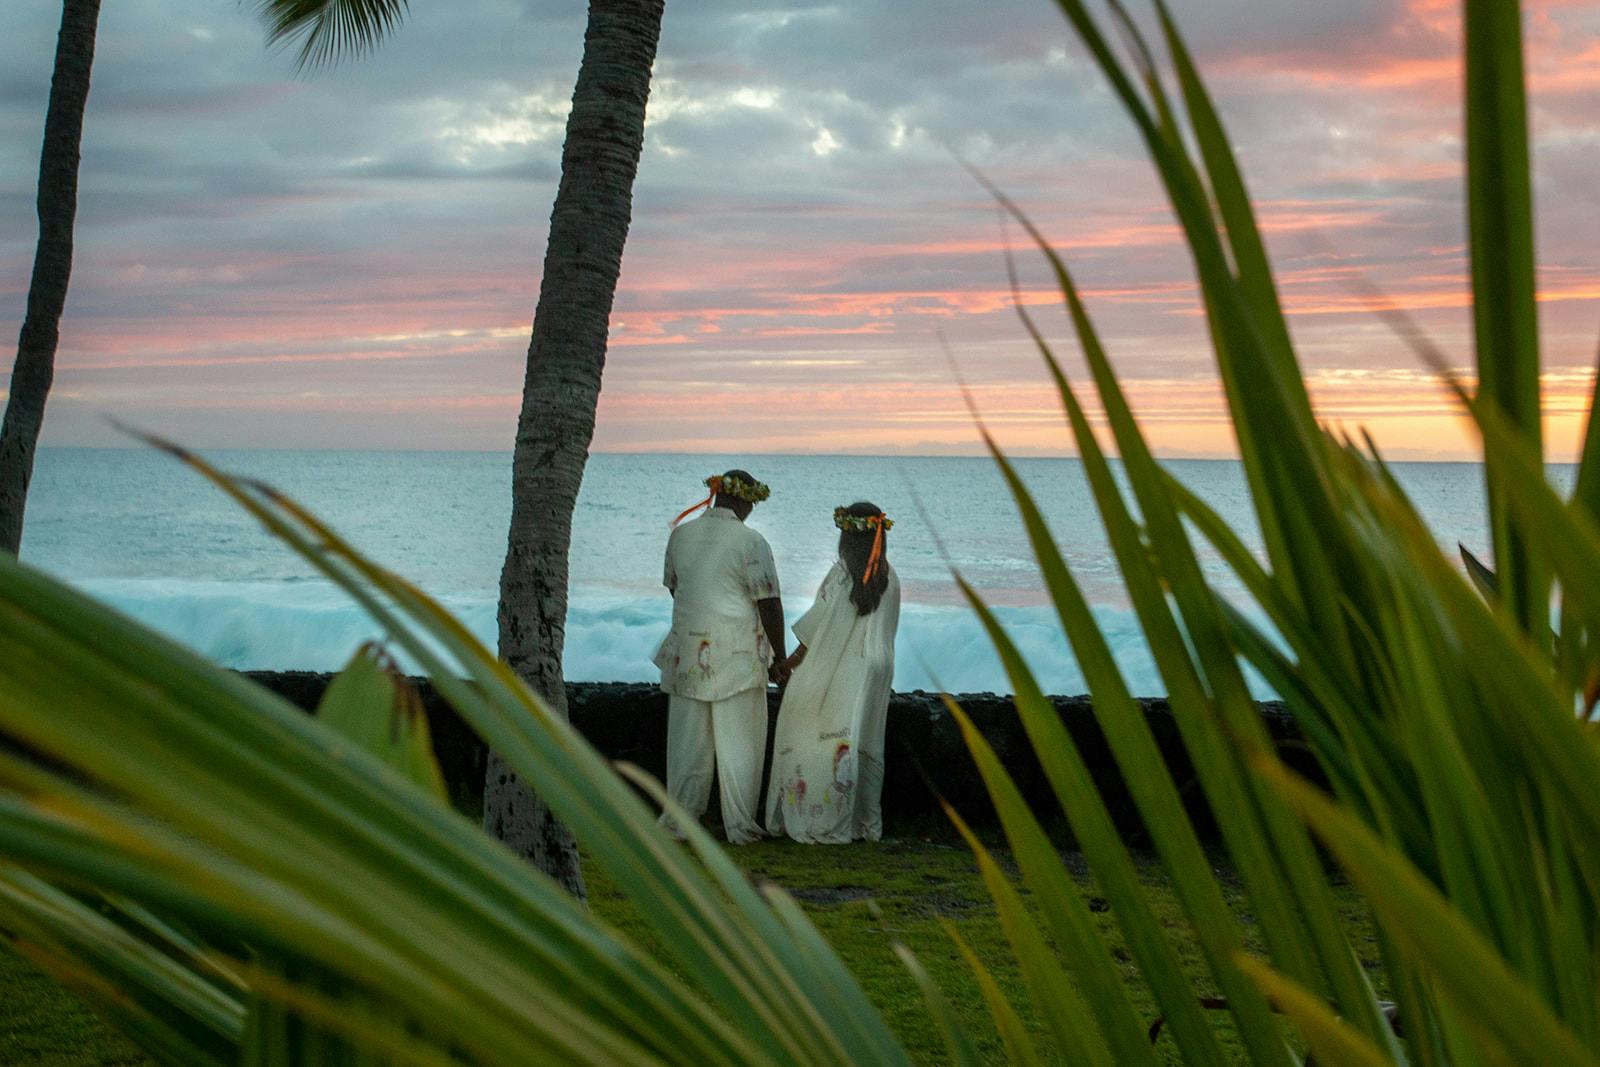 Kauai elopement photographer for natural and candid images